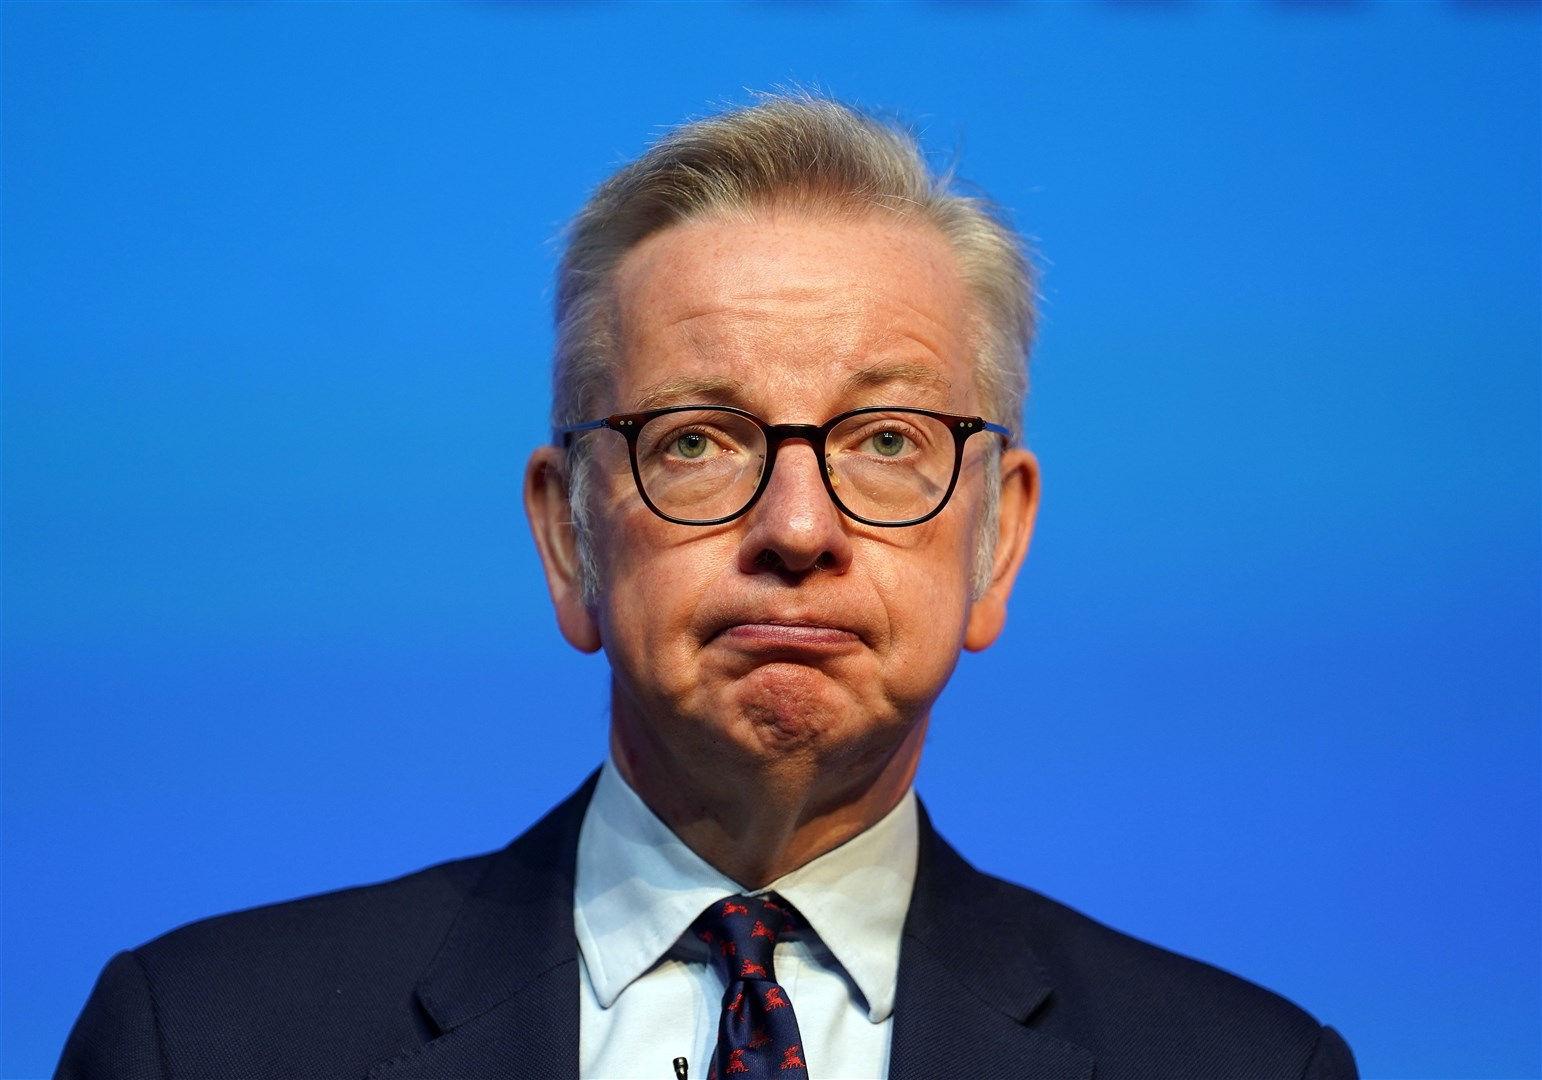 Michael Gove is expected to appear later in the week (Andrew Milligan/PA)